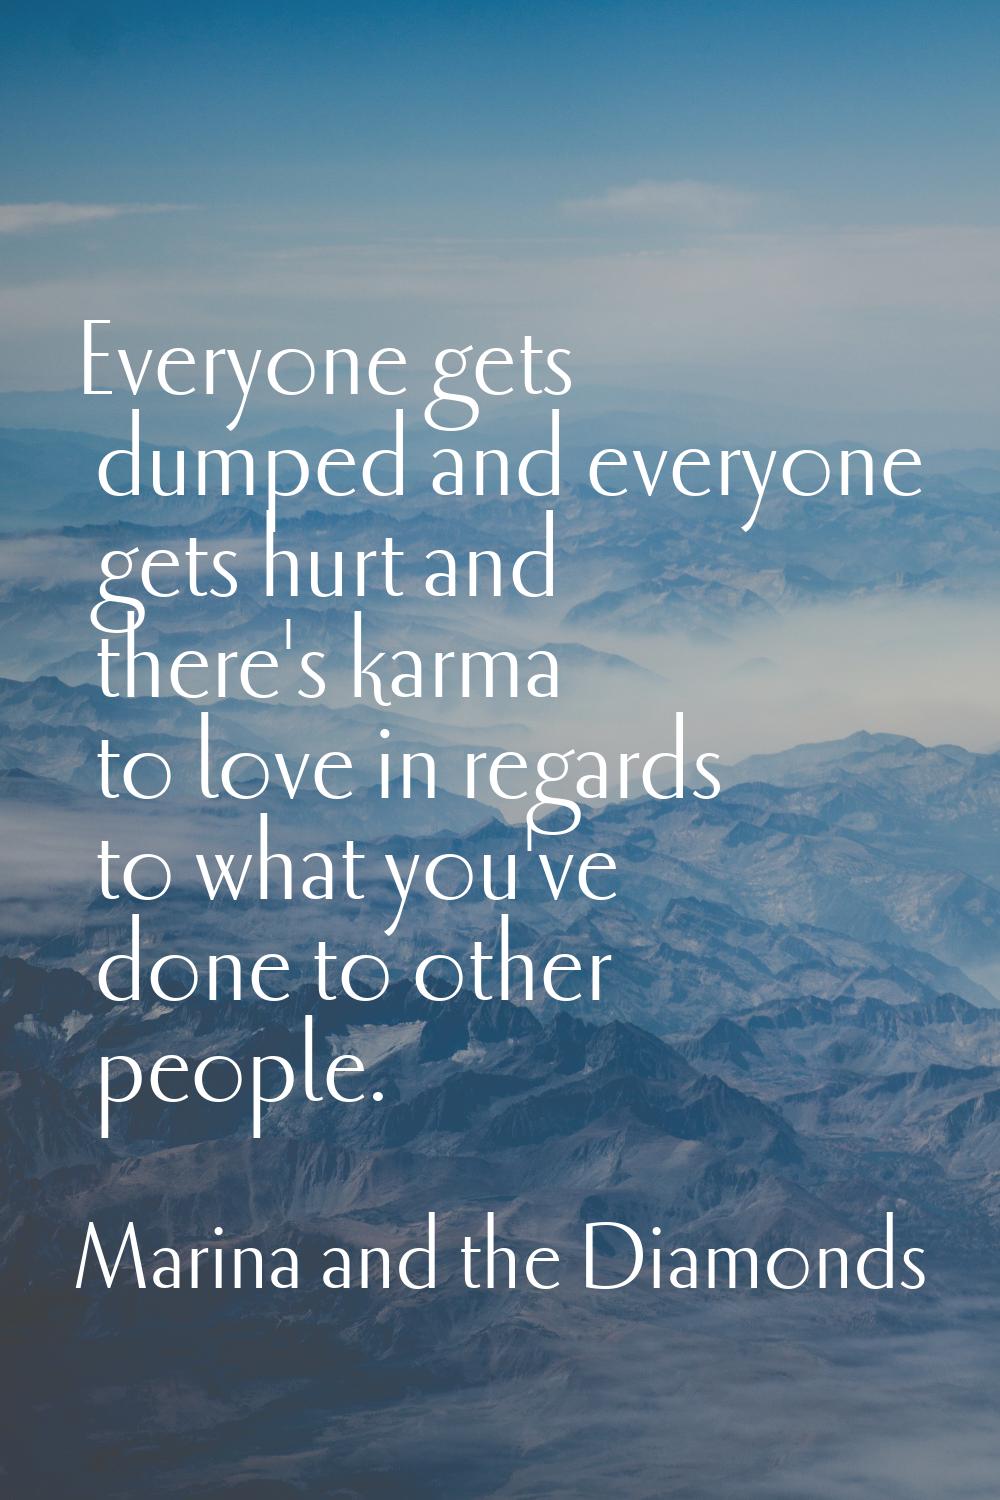 Everyone gets dumped and everyone gets hurt and there's karma to love in regards to what you've don